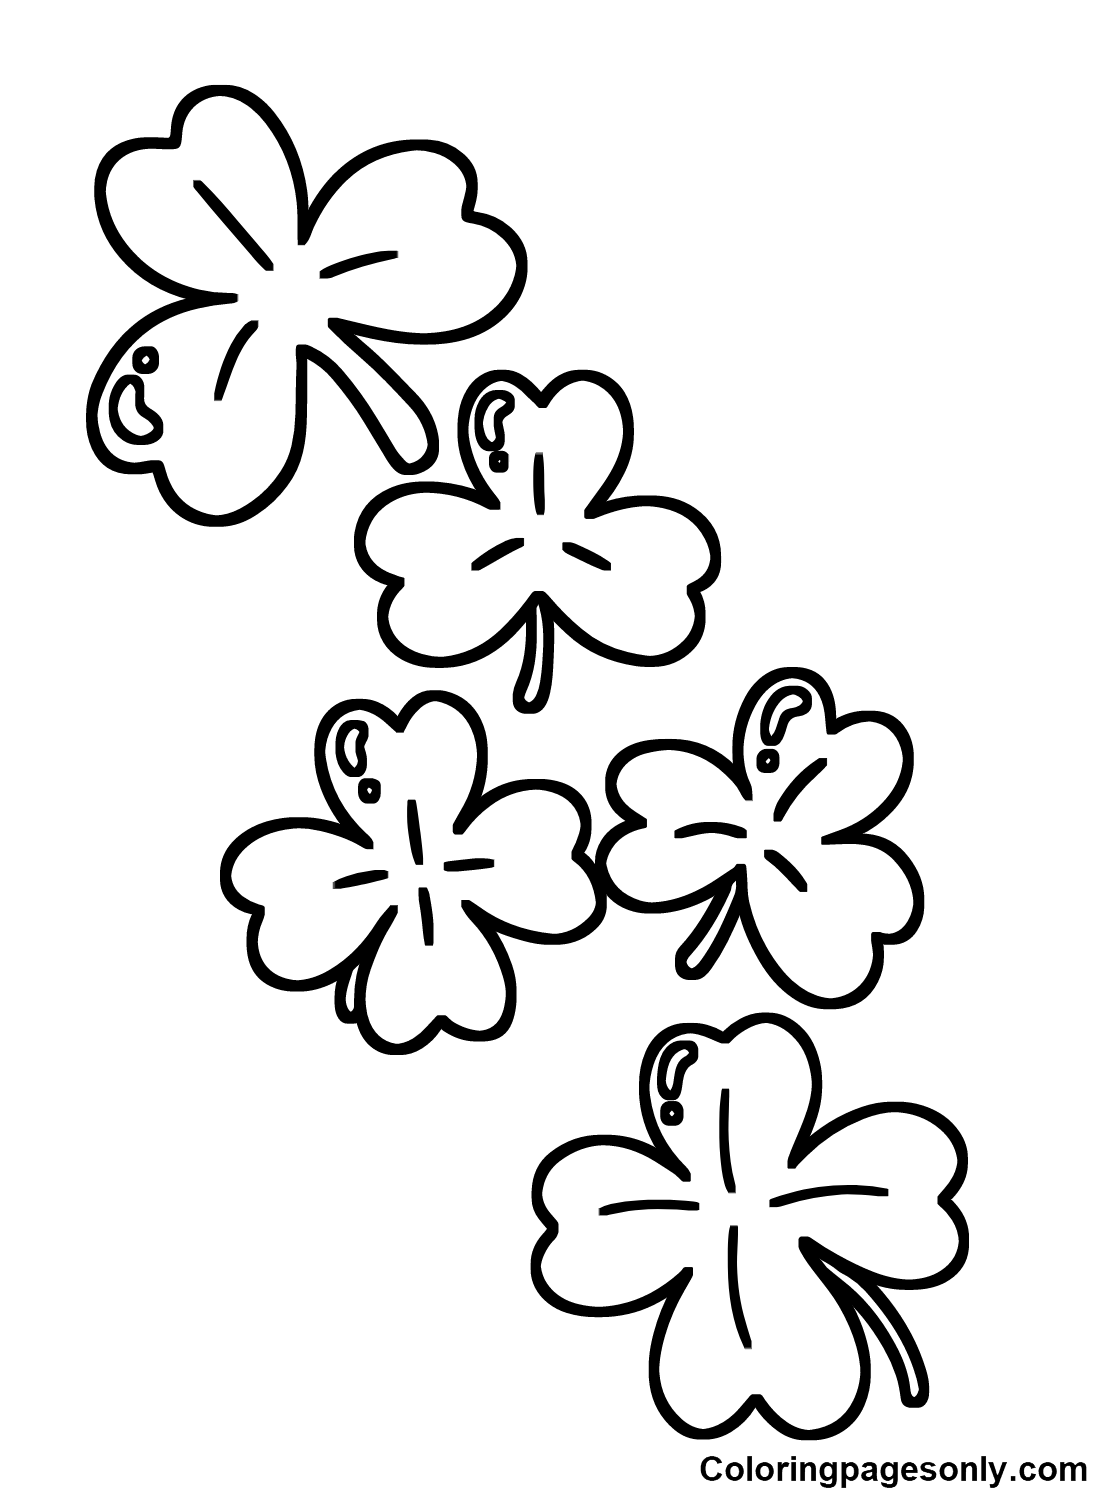 Shamrock Image Coloring Pages